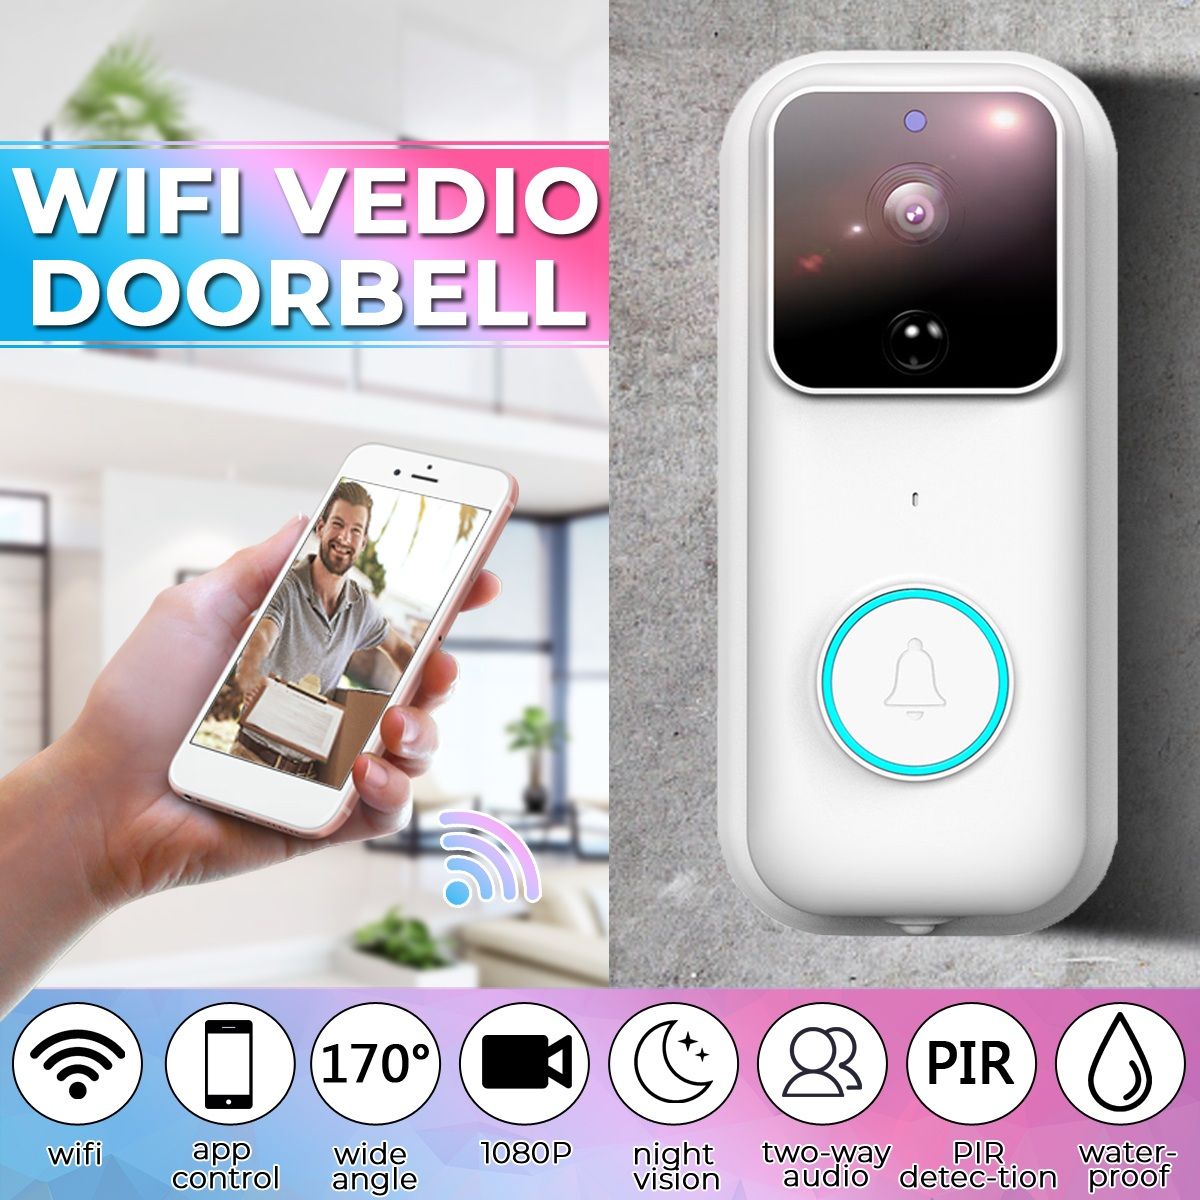 ANYTEK-B60-WiFi-Video-Doorbell-170deg-Wide-Angle-APP-Night-Vision-for-IOS-Android-1548174